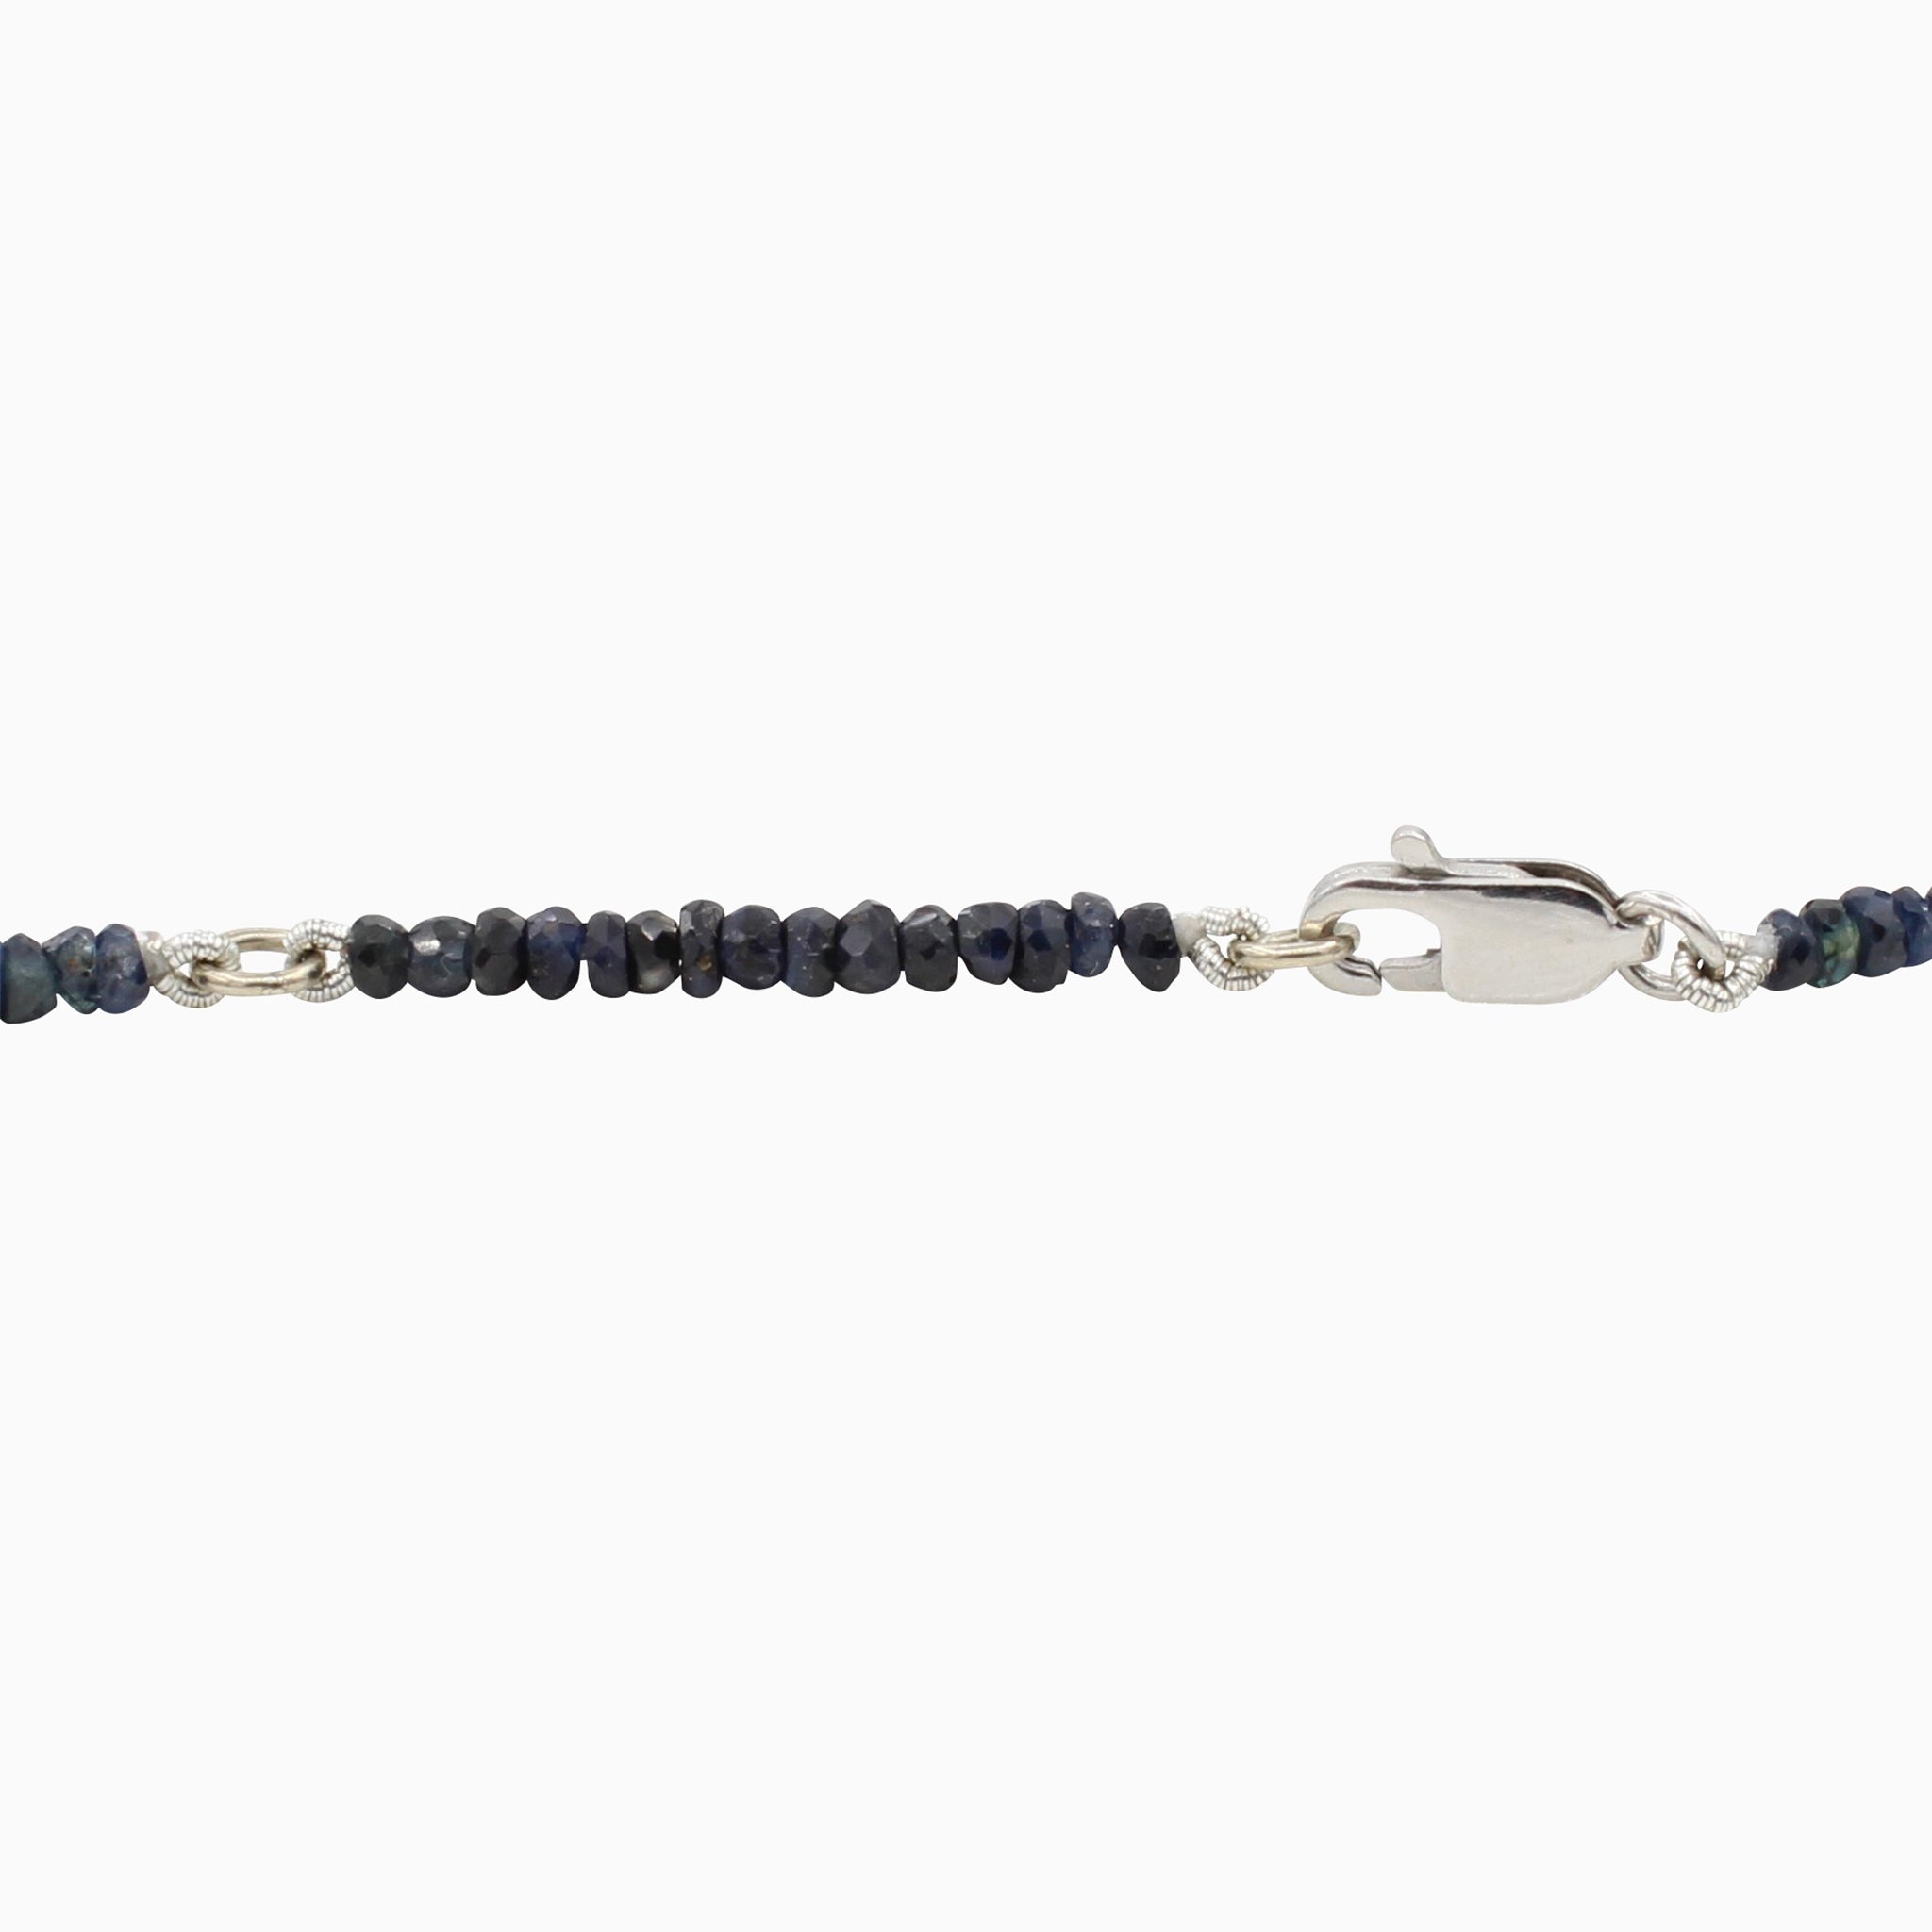 Blue 40CT Adjustable Ombre Sapphire Choker Necklace, 14k White Gold Lobster Clasp Closure